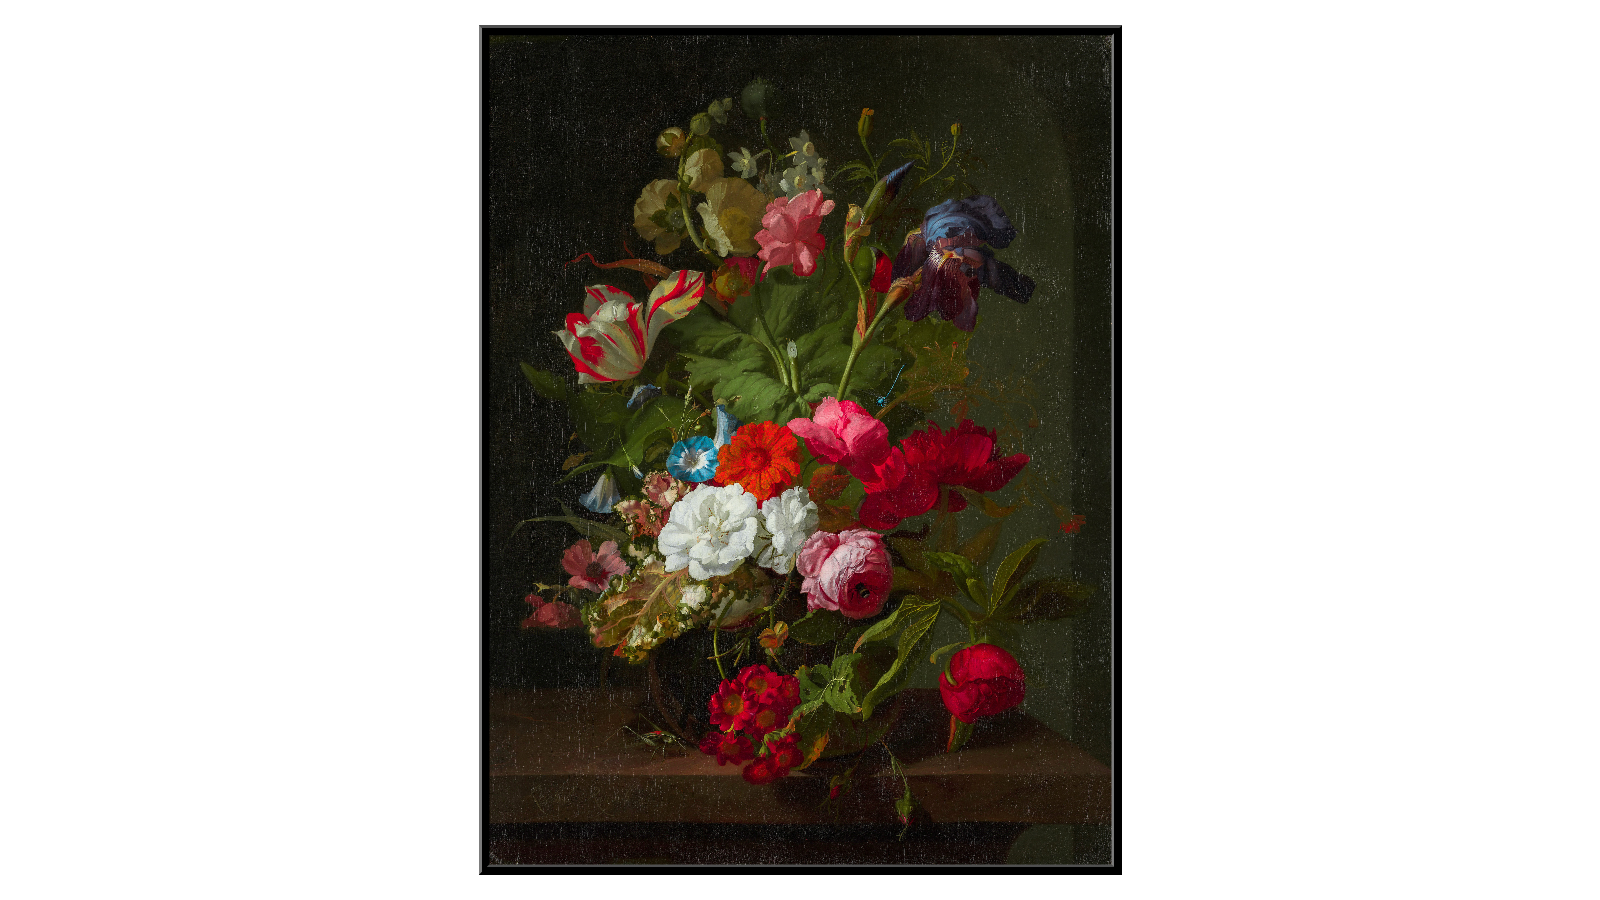 Vase with Red, Blue, and White Flowers